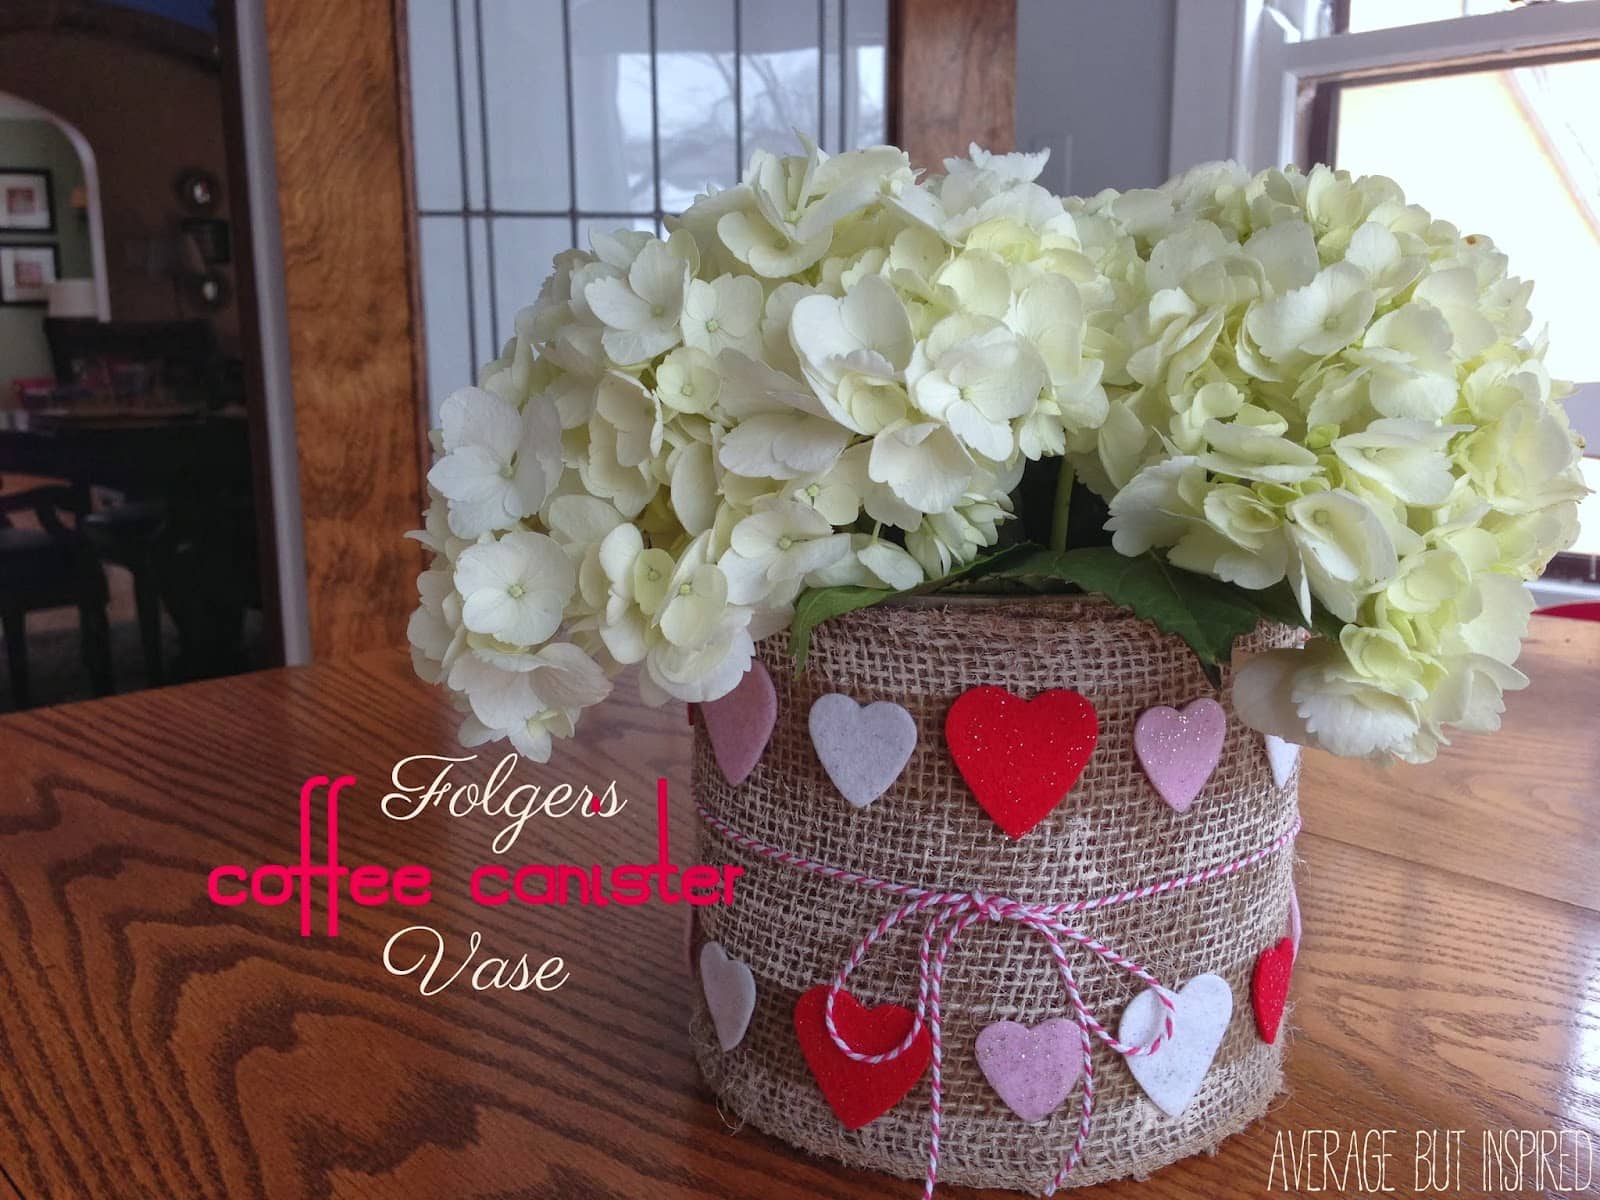 Folgers Coffee Canister Vase